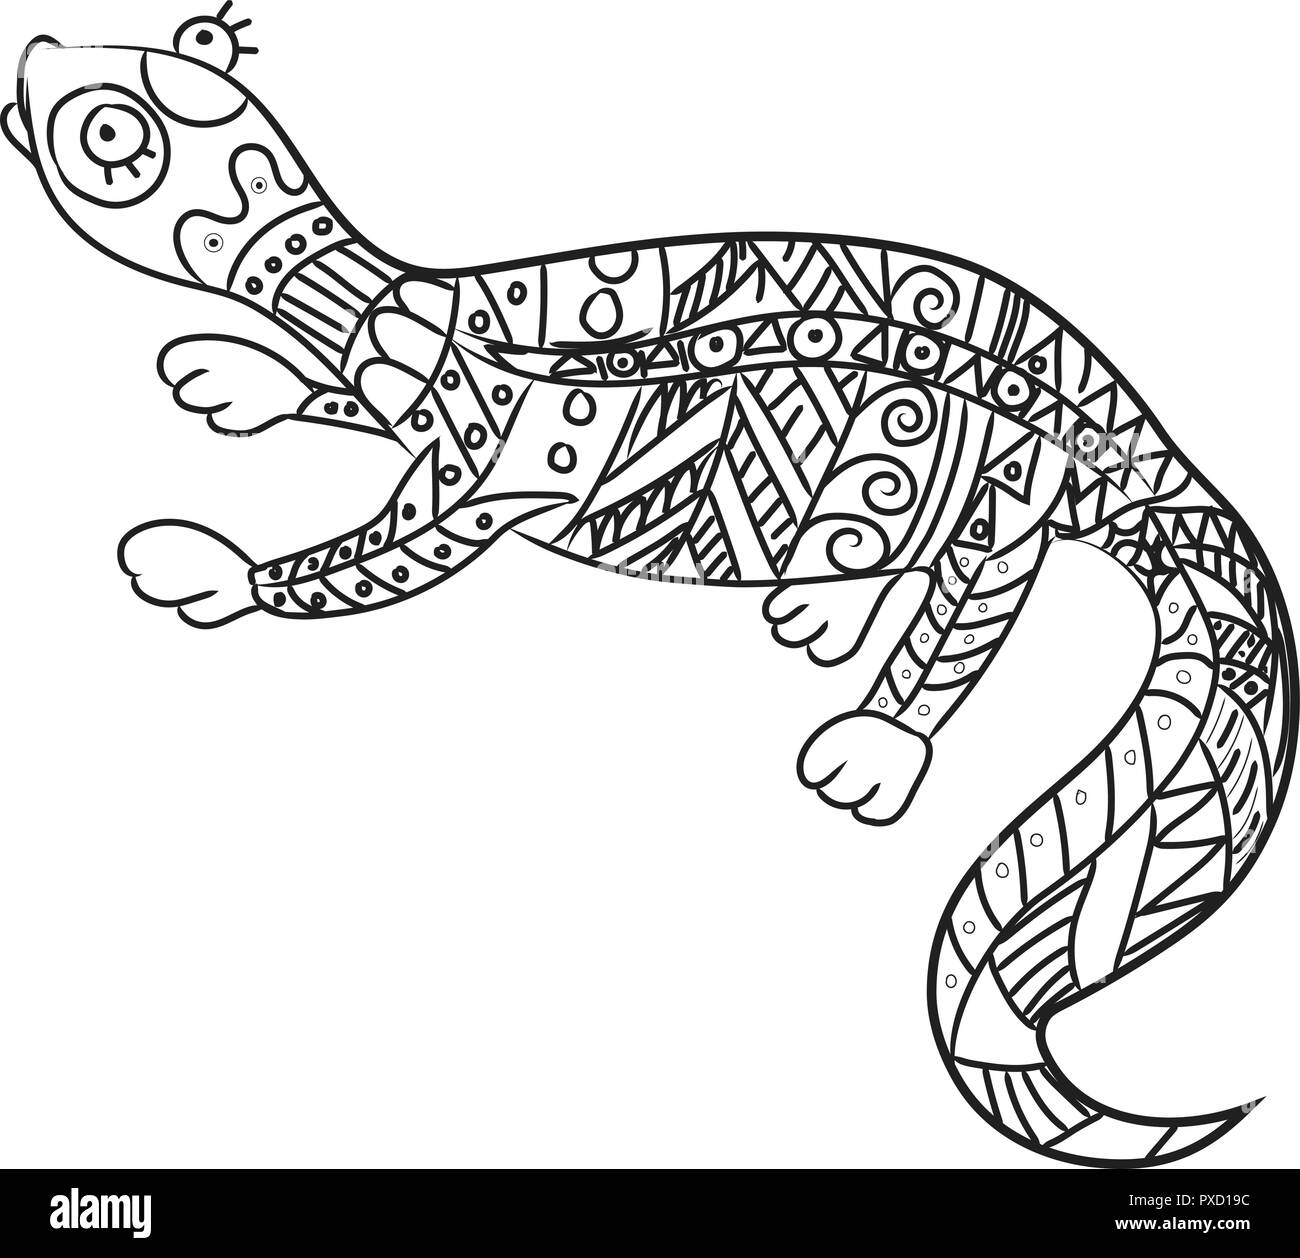 Stylized reptile isolated on white background. Lizard hand drawn sketch for children coloring book. Stock Vector